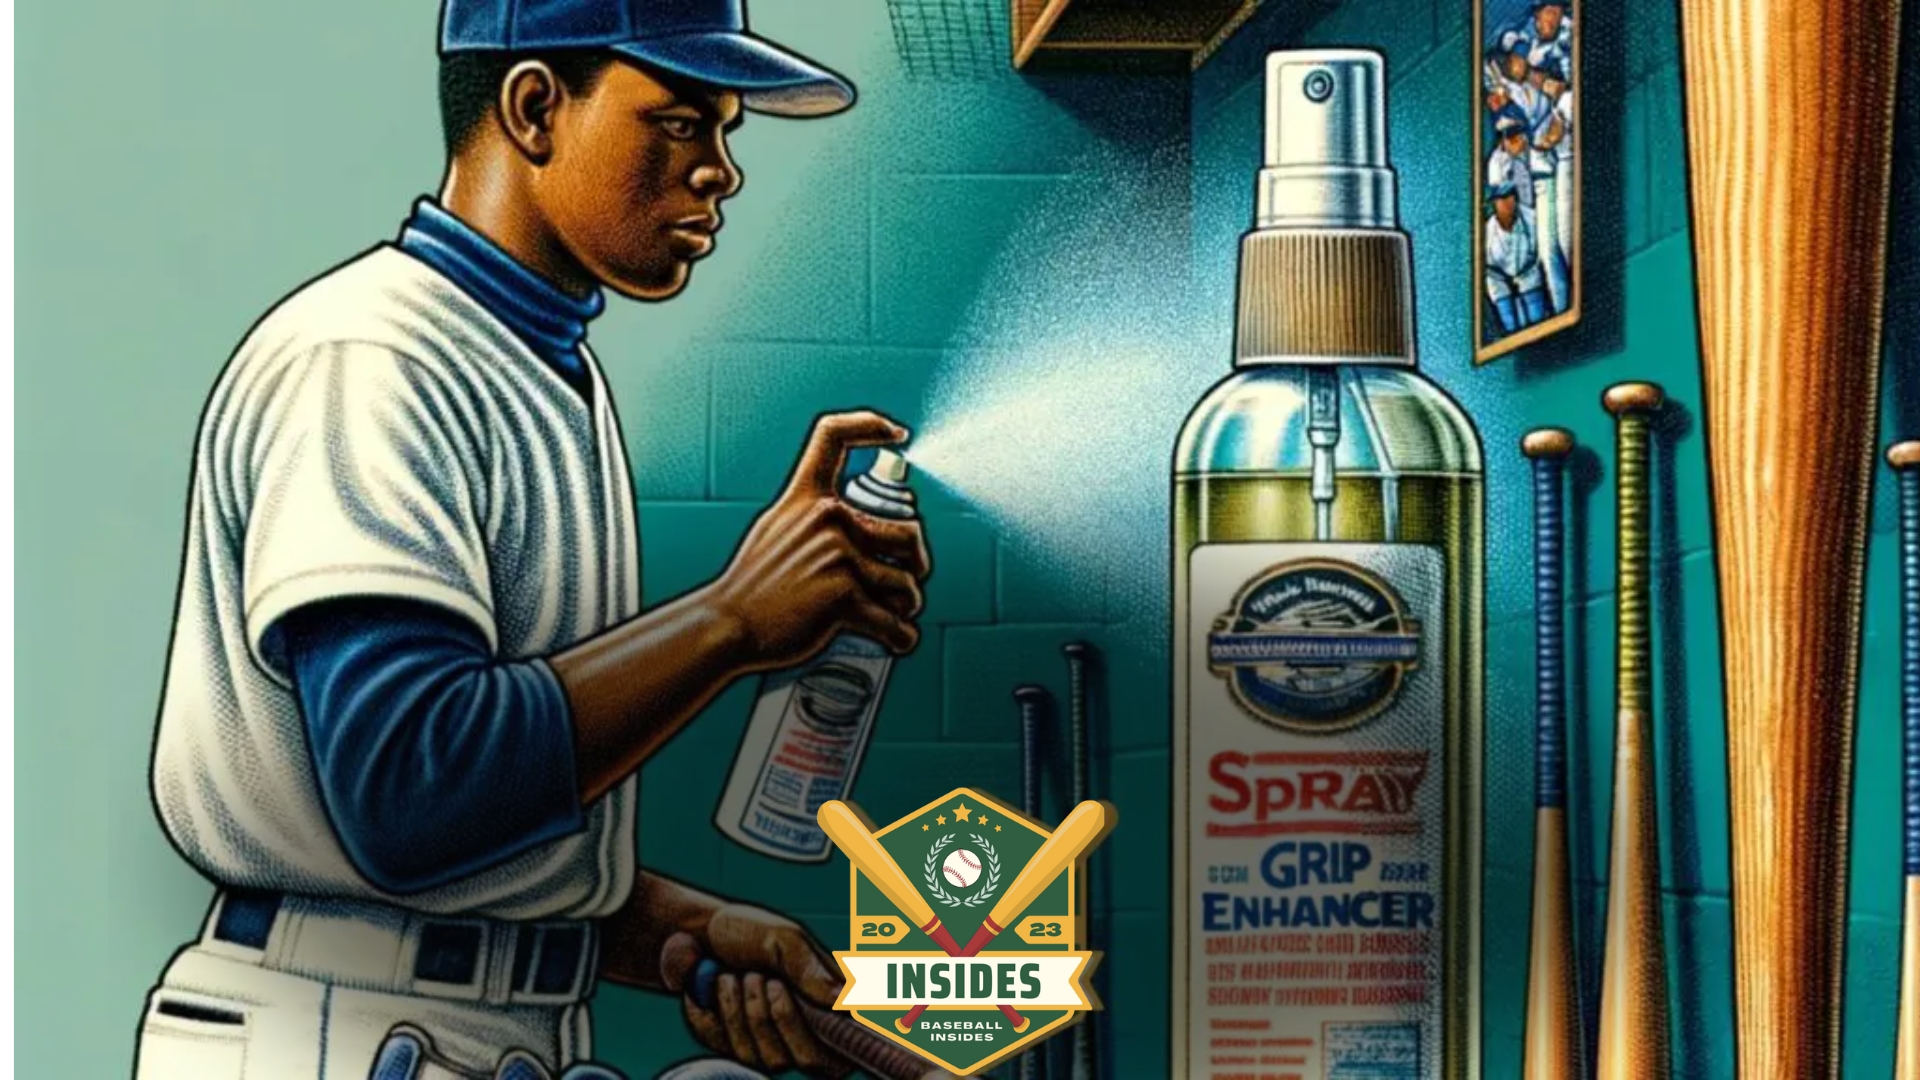 What Do Baseball Players Spray on Their Bats